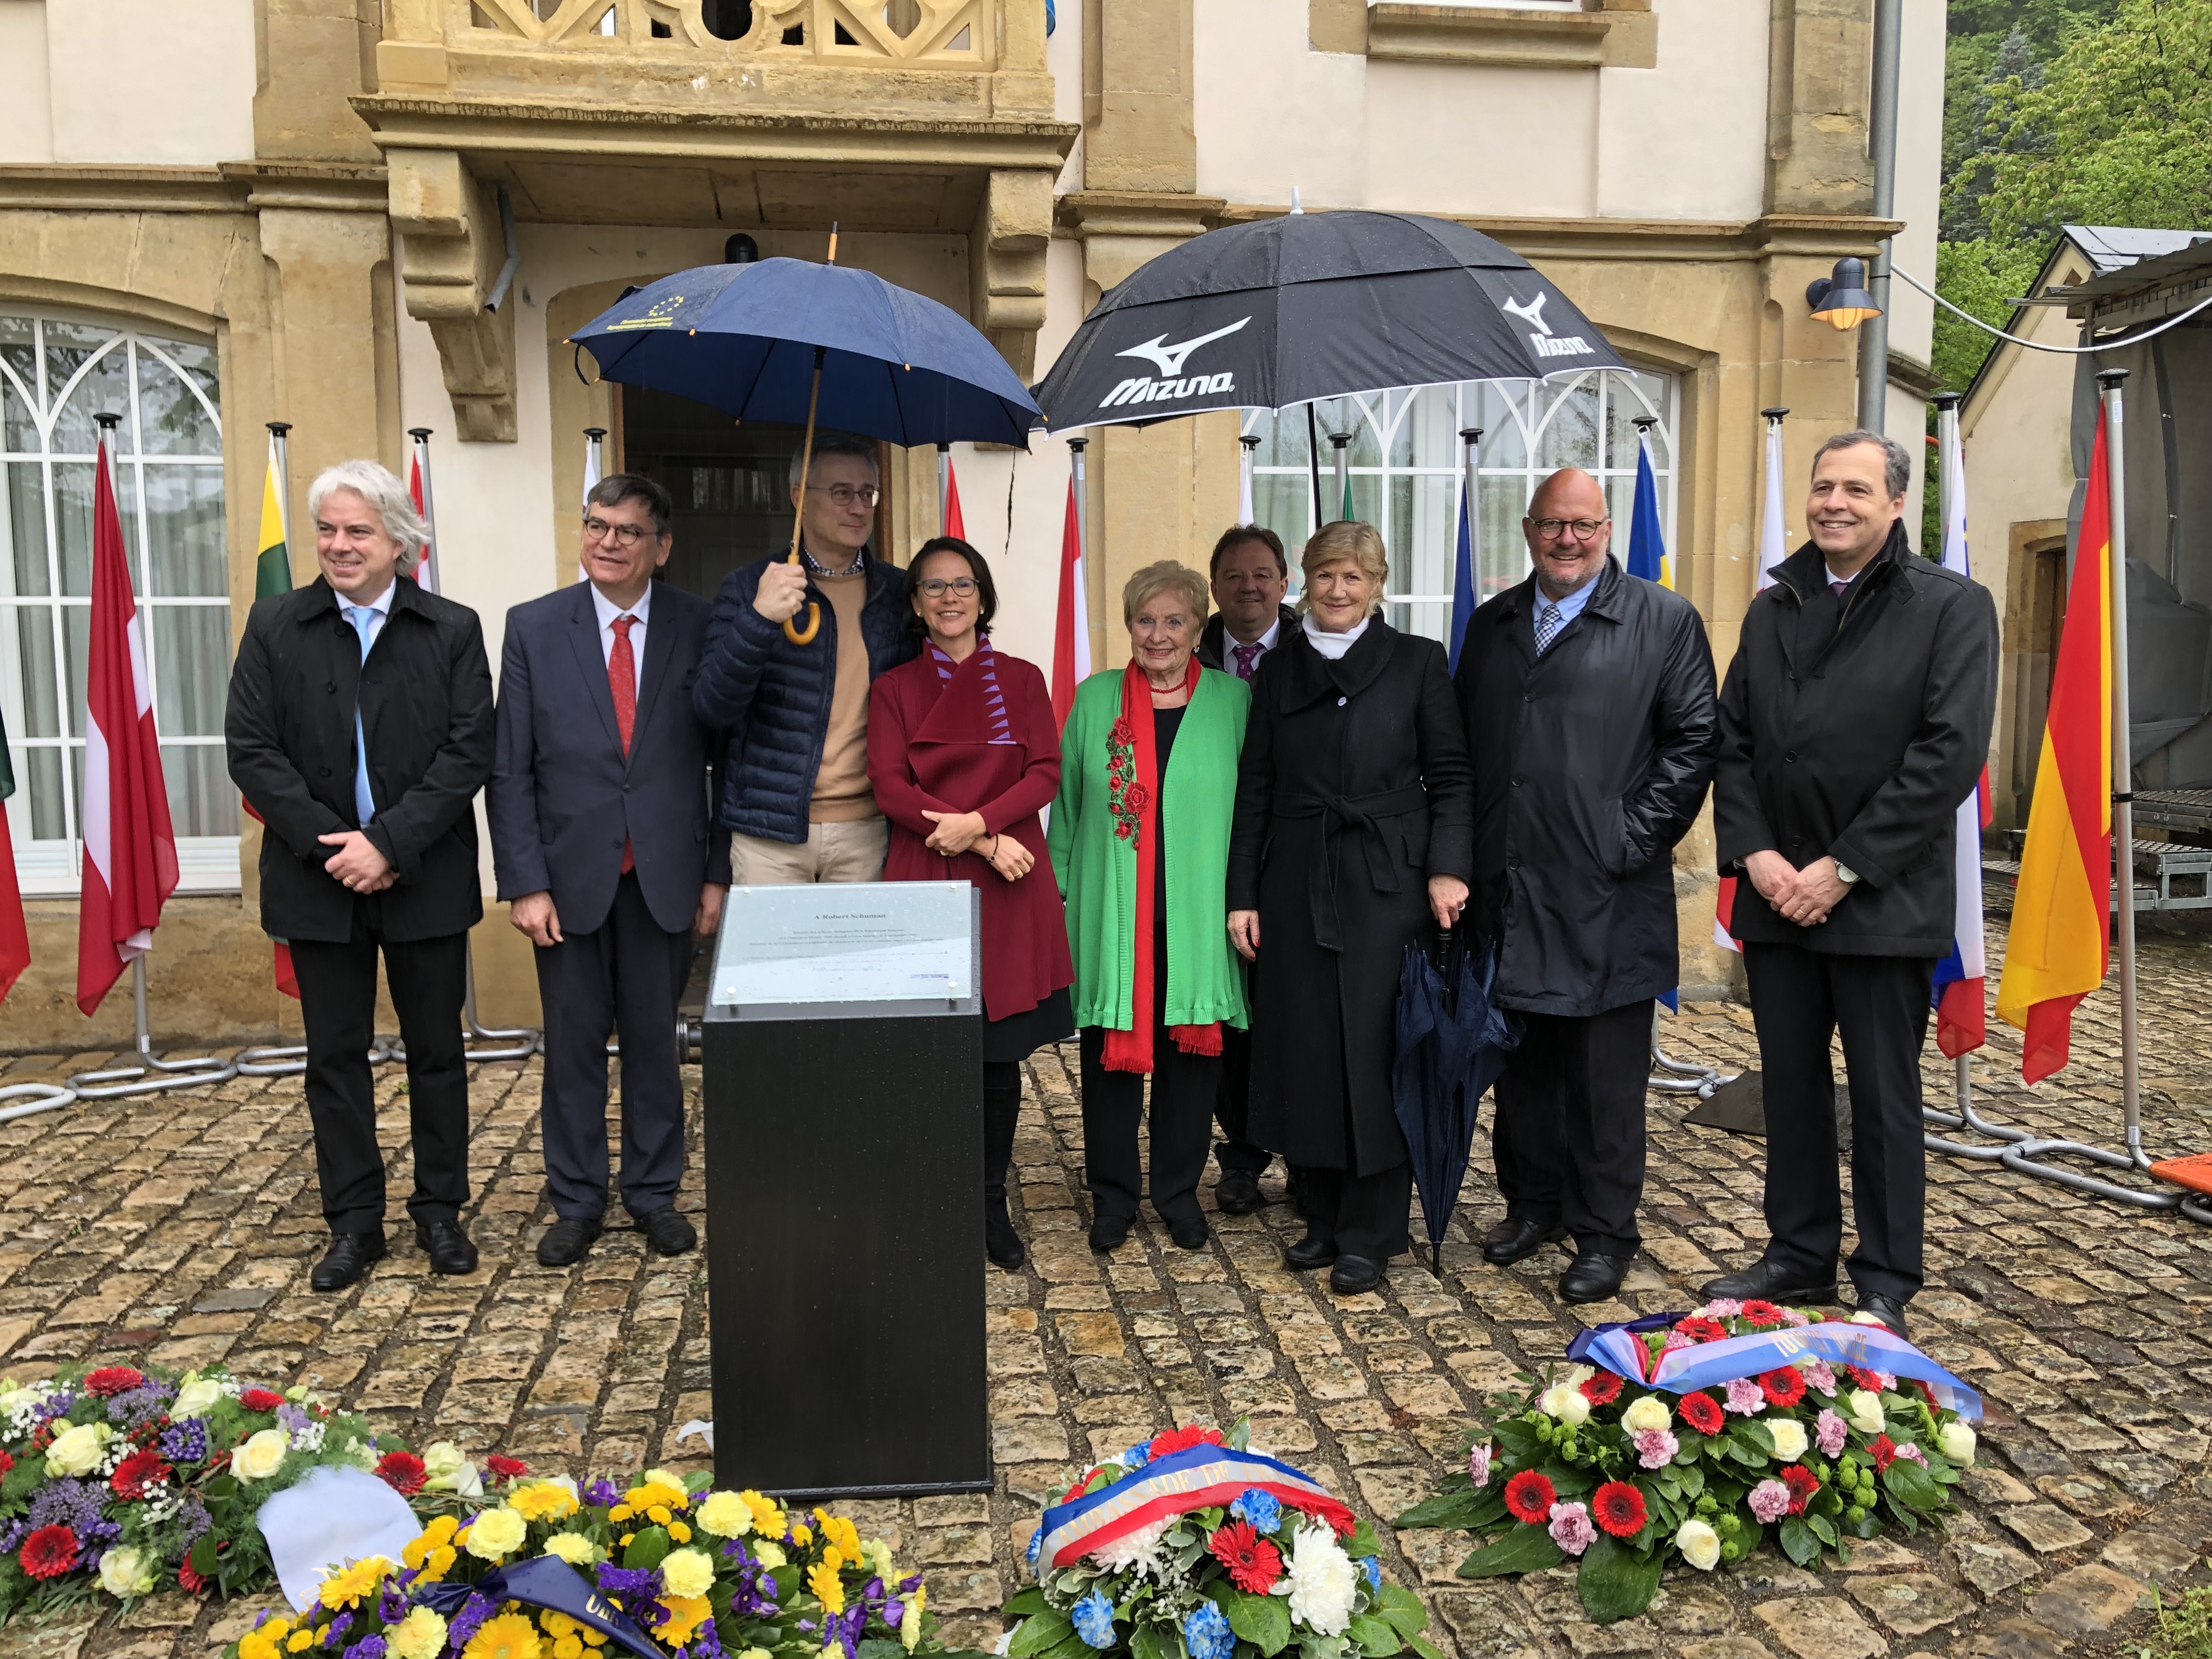 Celebrating Europe Day in Luxembourg